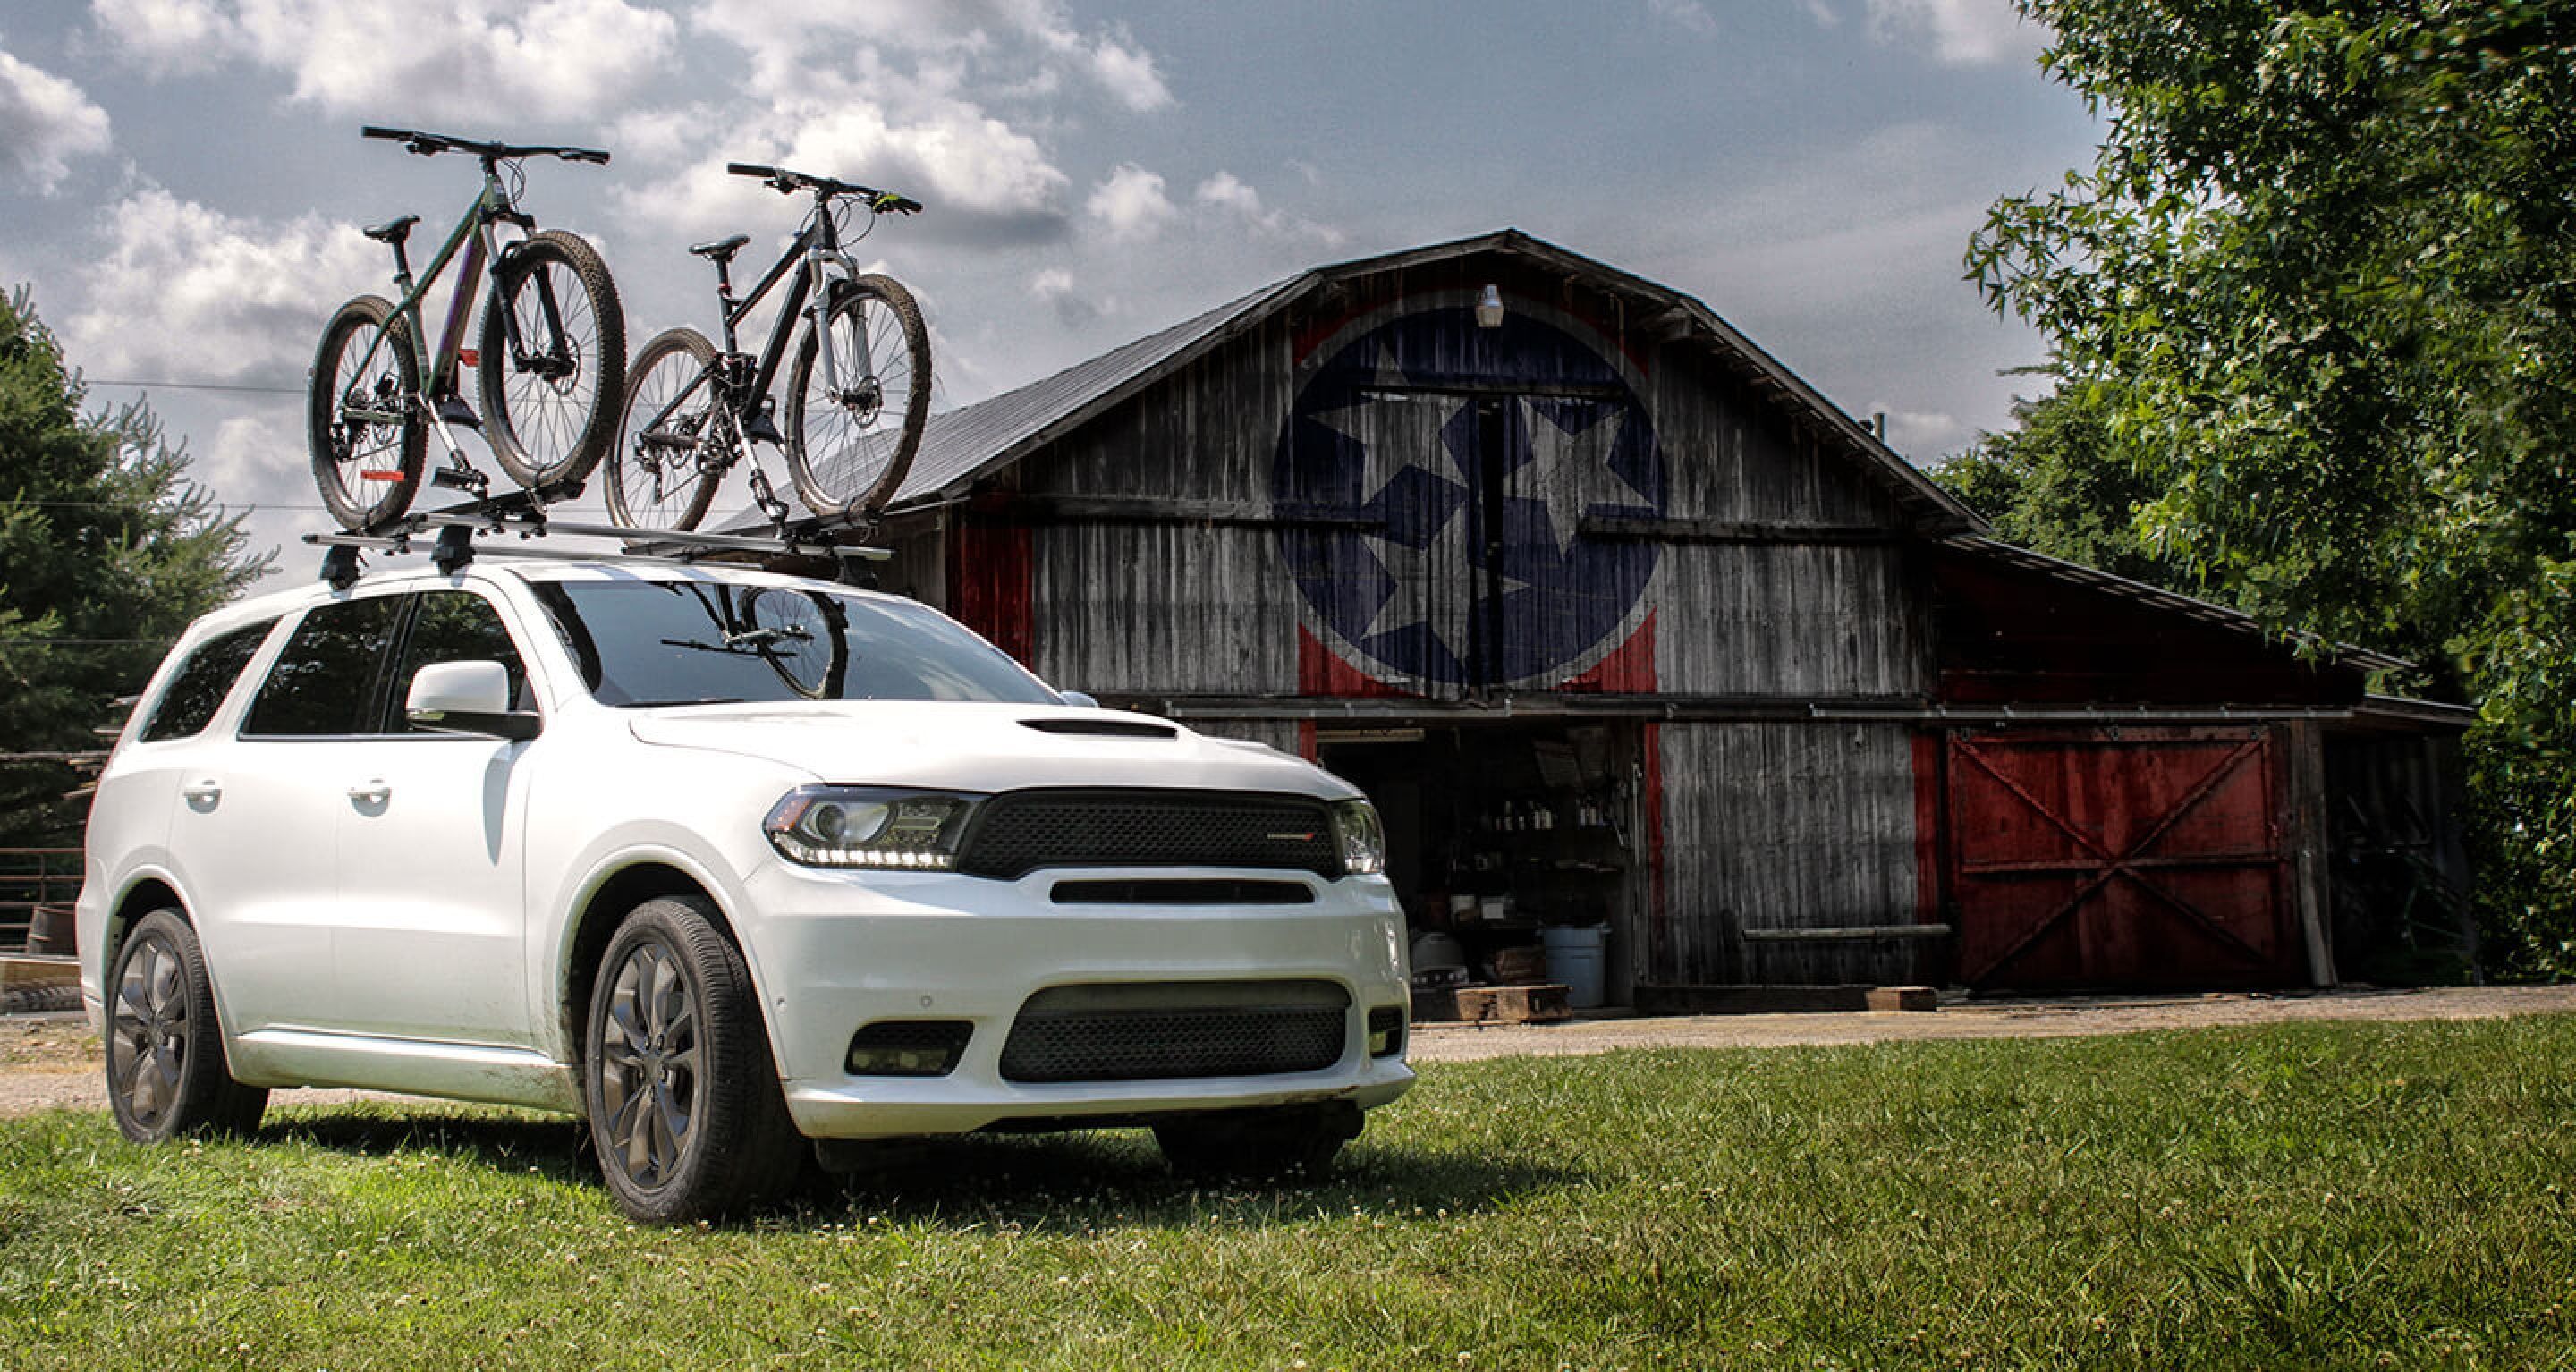 Dodge Durango with bikes on the roof in front of an old barn